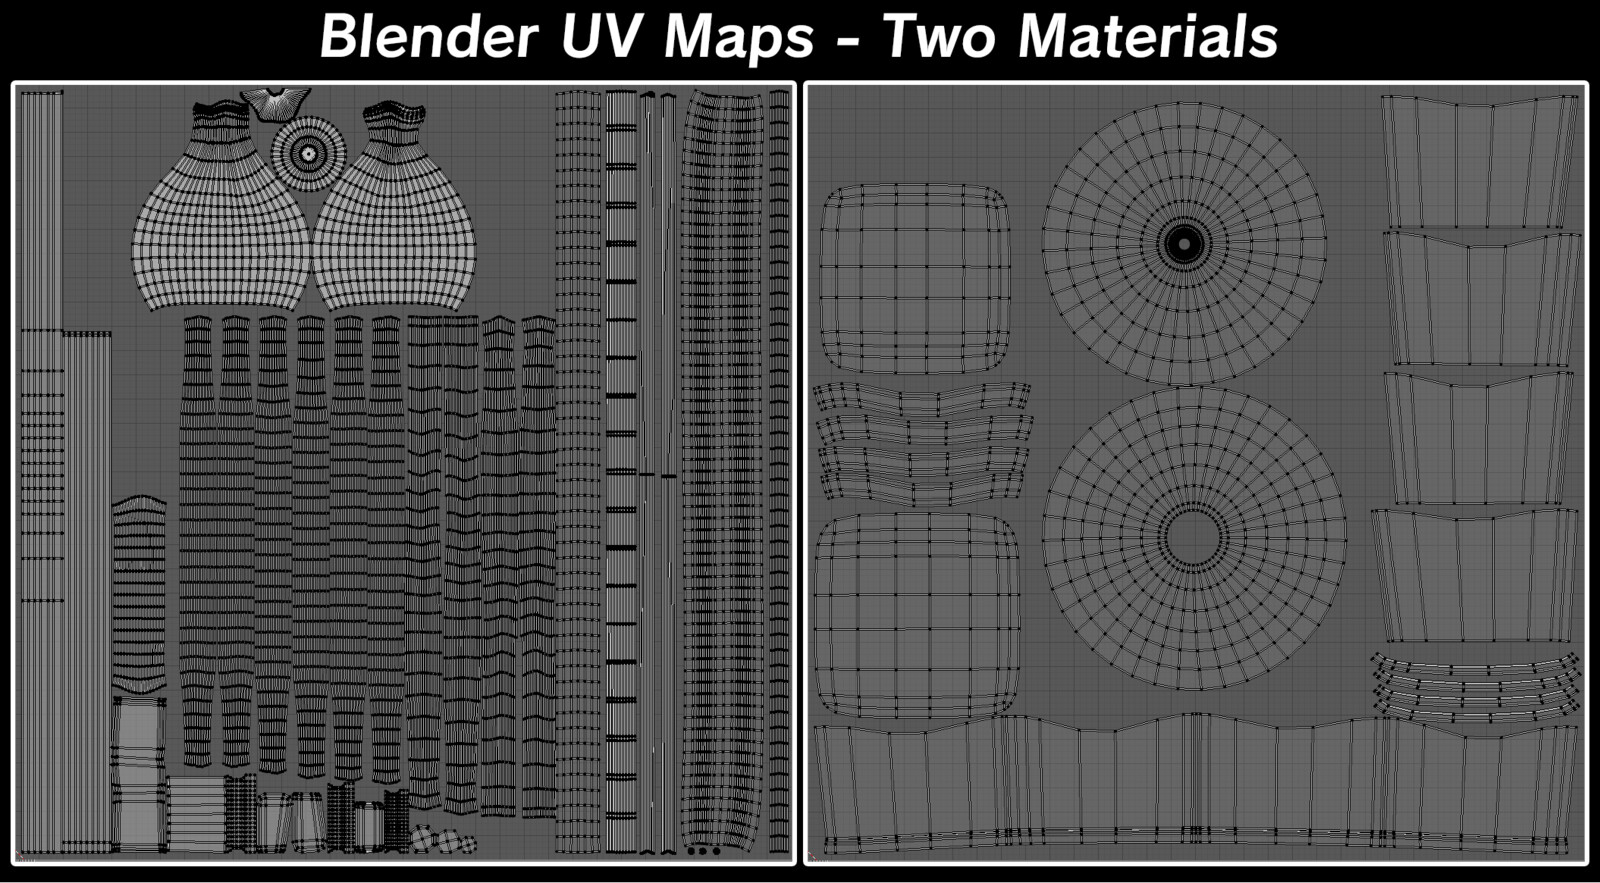 I made the decision to split the asset into two materials mainly to maximize space and to separate unique UV islands from overlapping ones. The first material on the left is 100% overlapping islands, and the right material is individual islands.